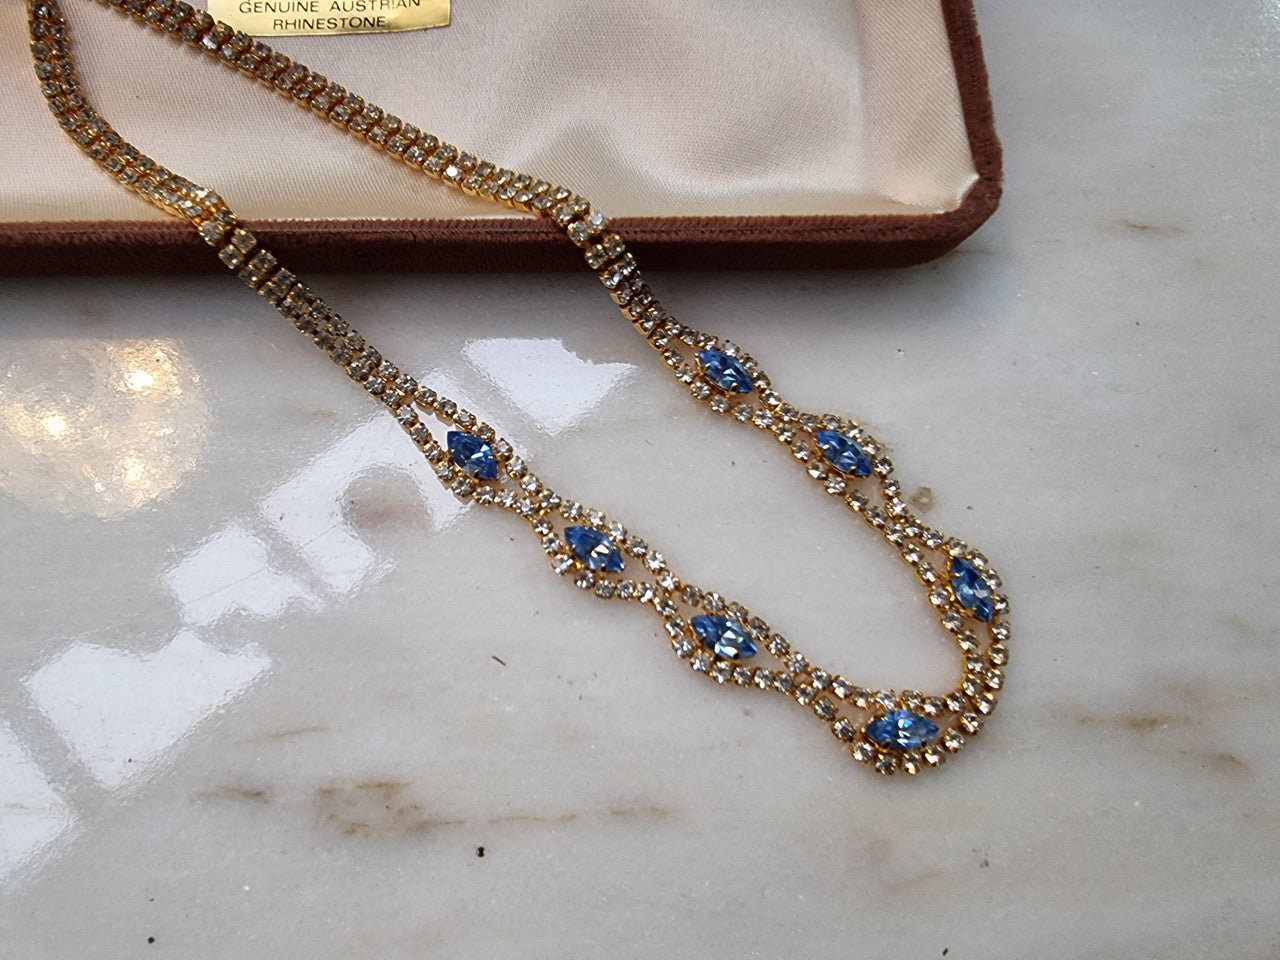 Beautiful vintage Austrian rhinestone necklace with lovely light blue stones and in good condition.